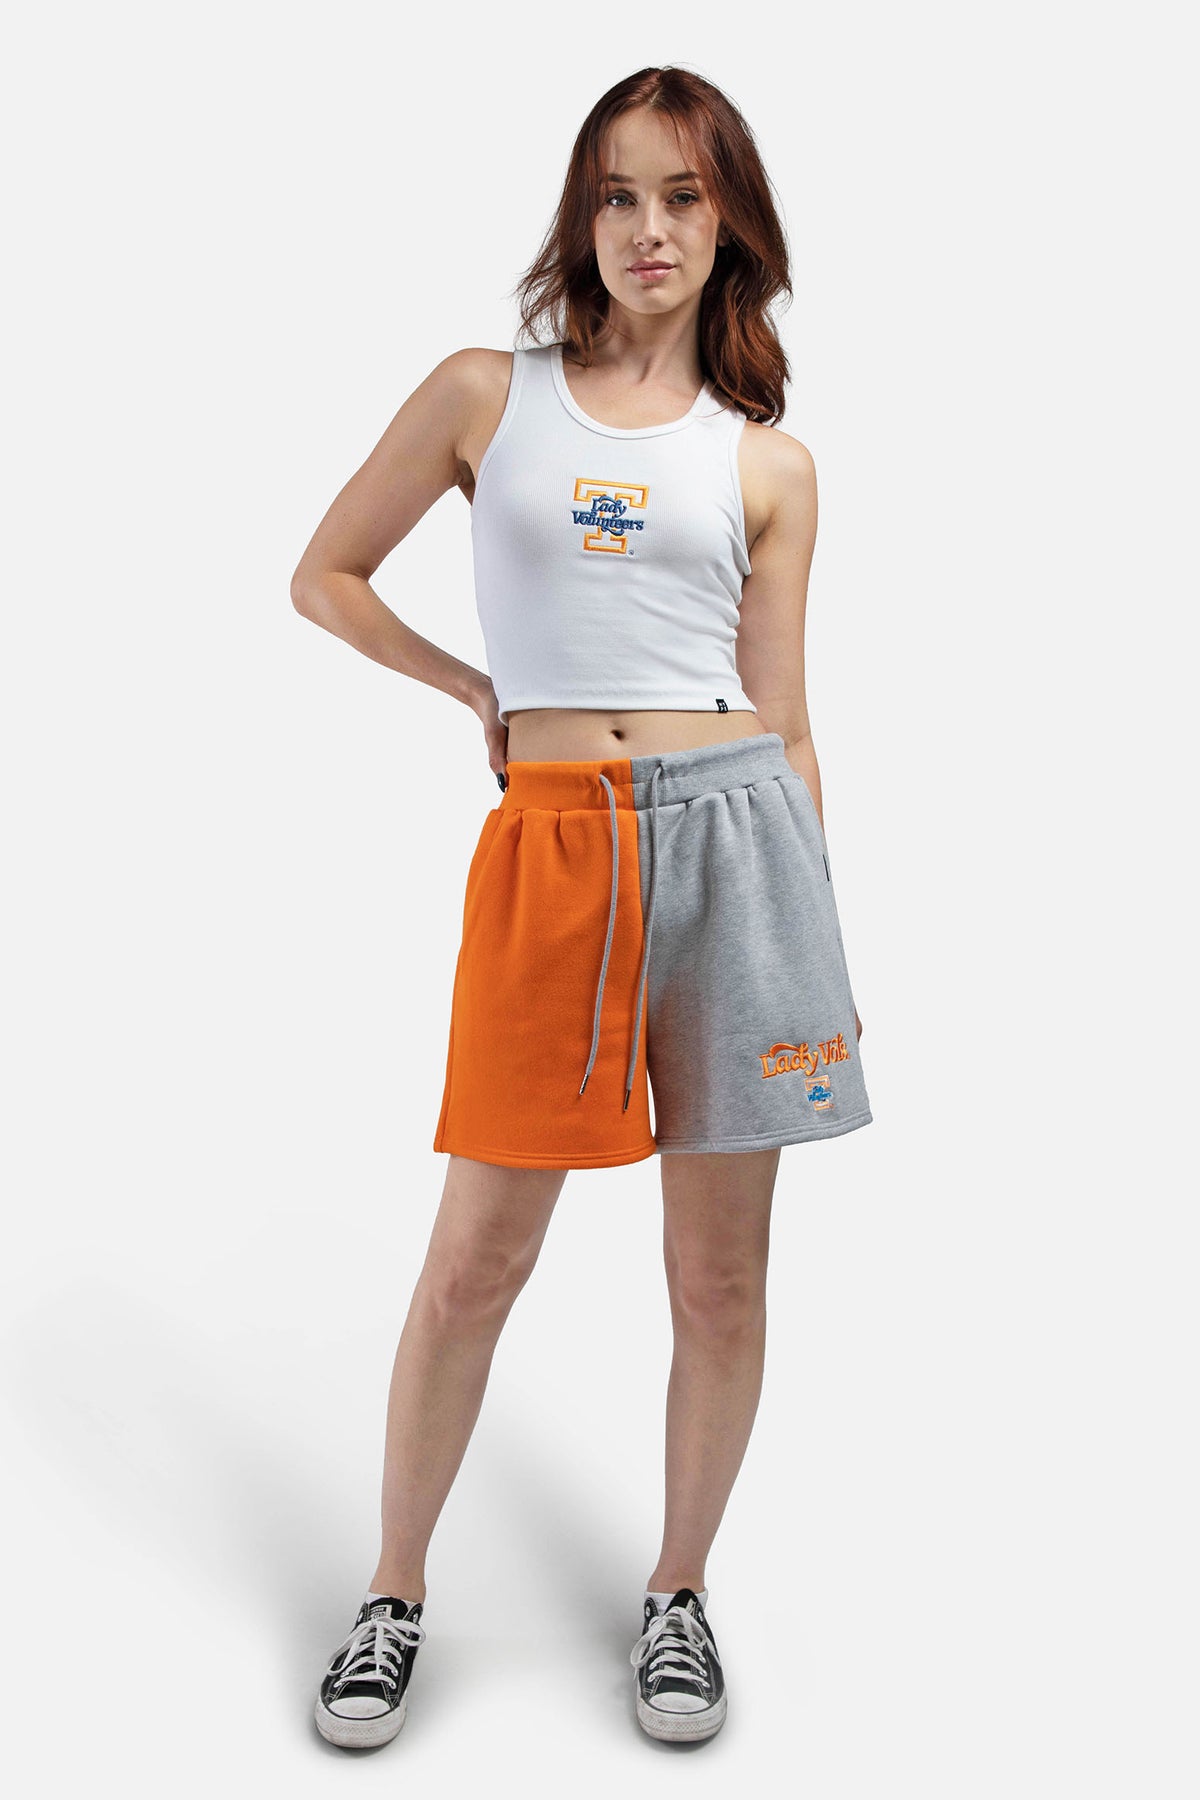 Tennessee Lady Vols Rookie Shorts